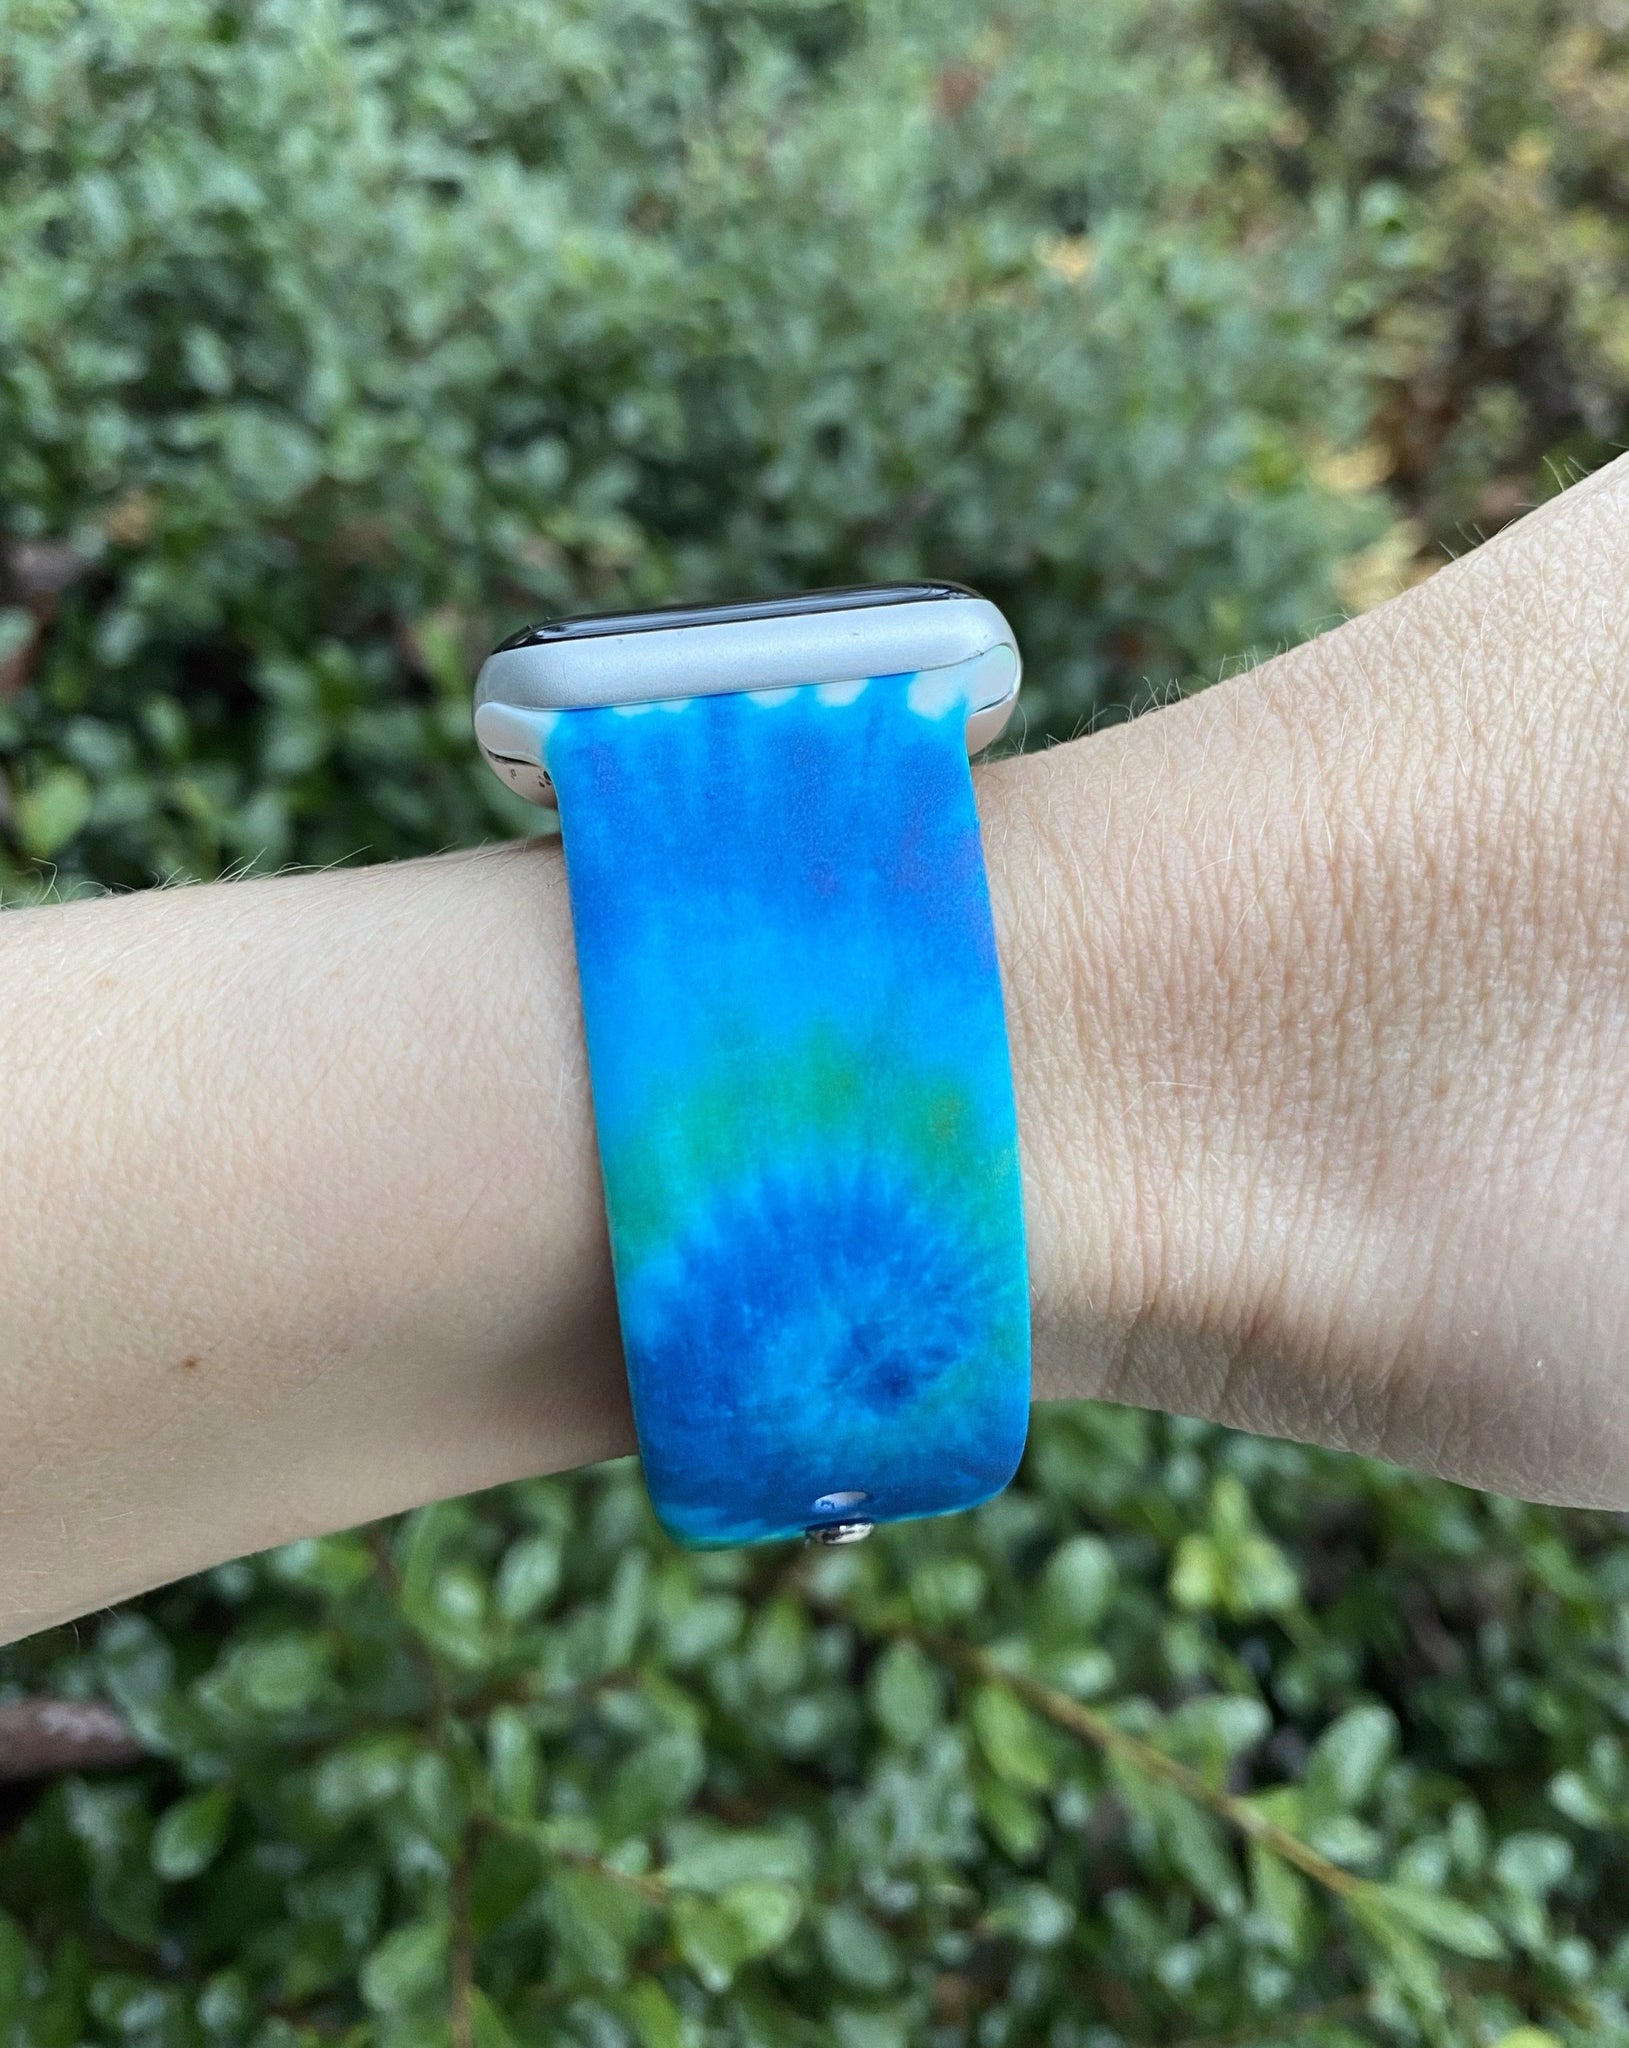 Blue & Green Tie Dye Silicone Band for Apple Watch